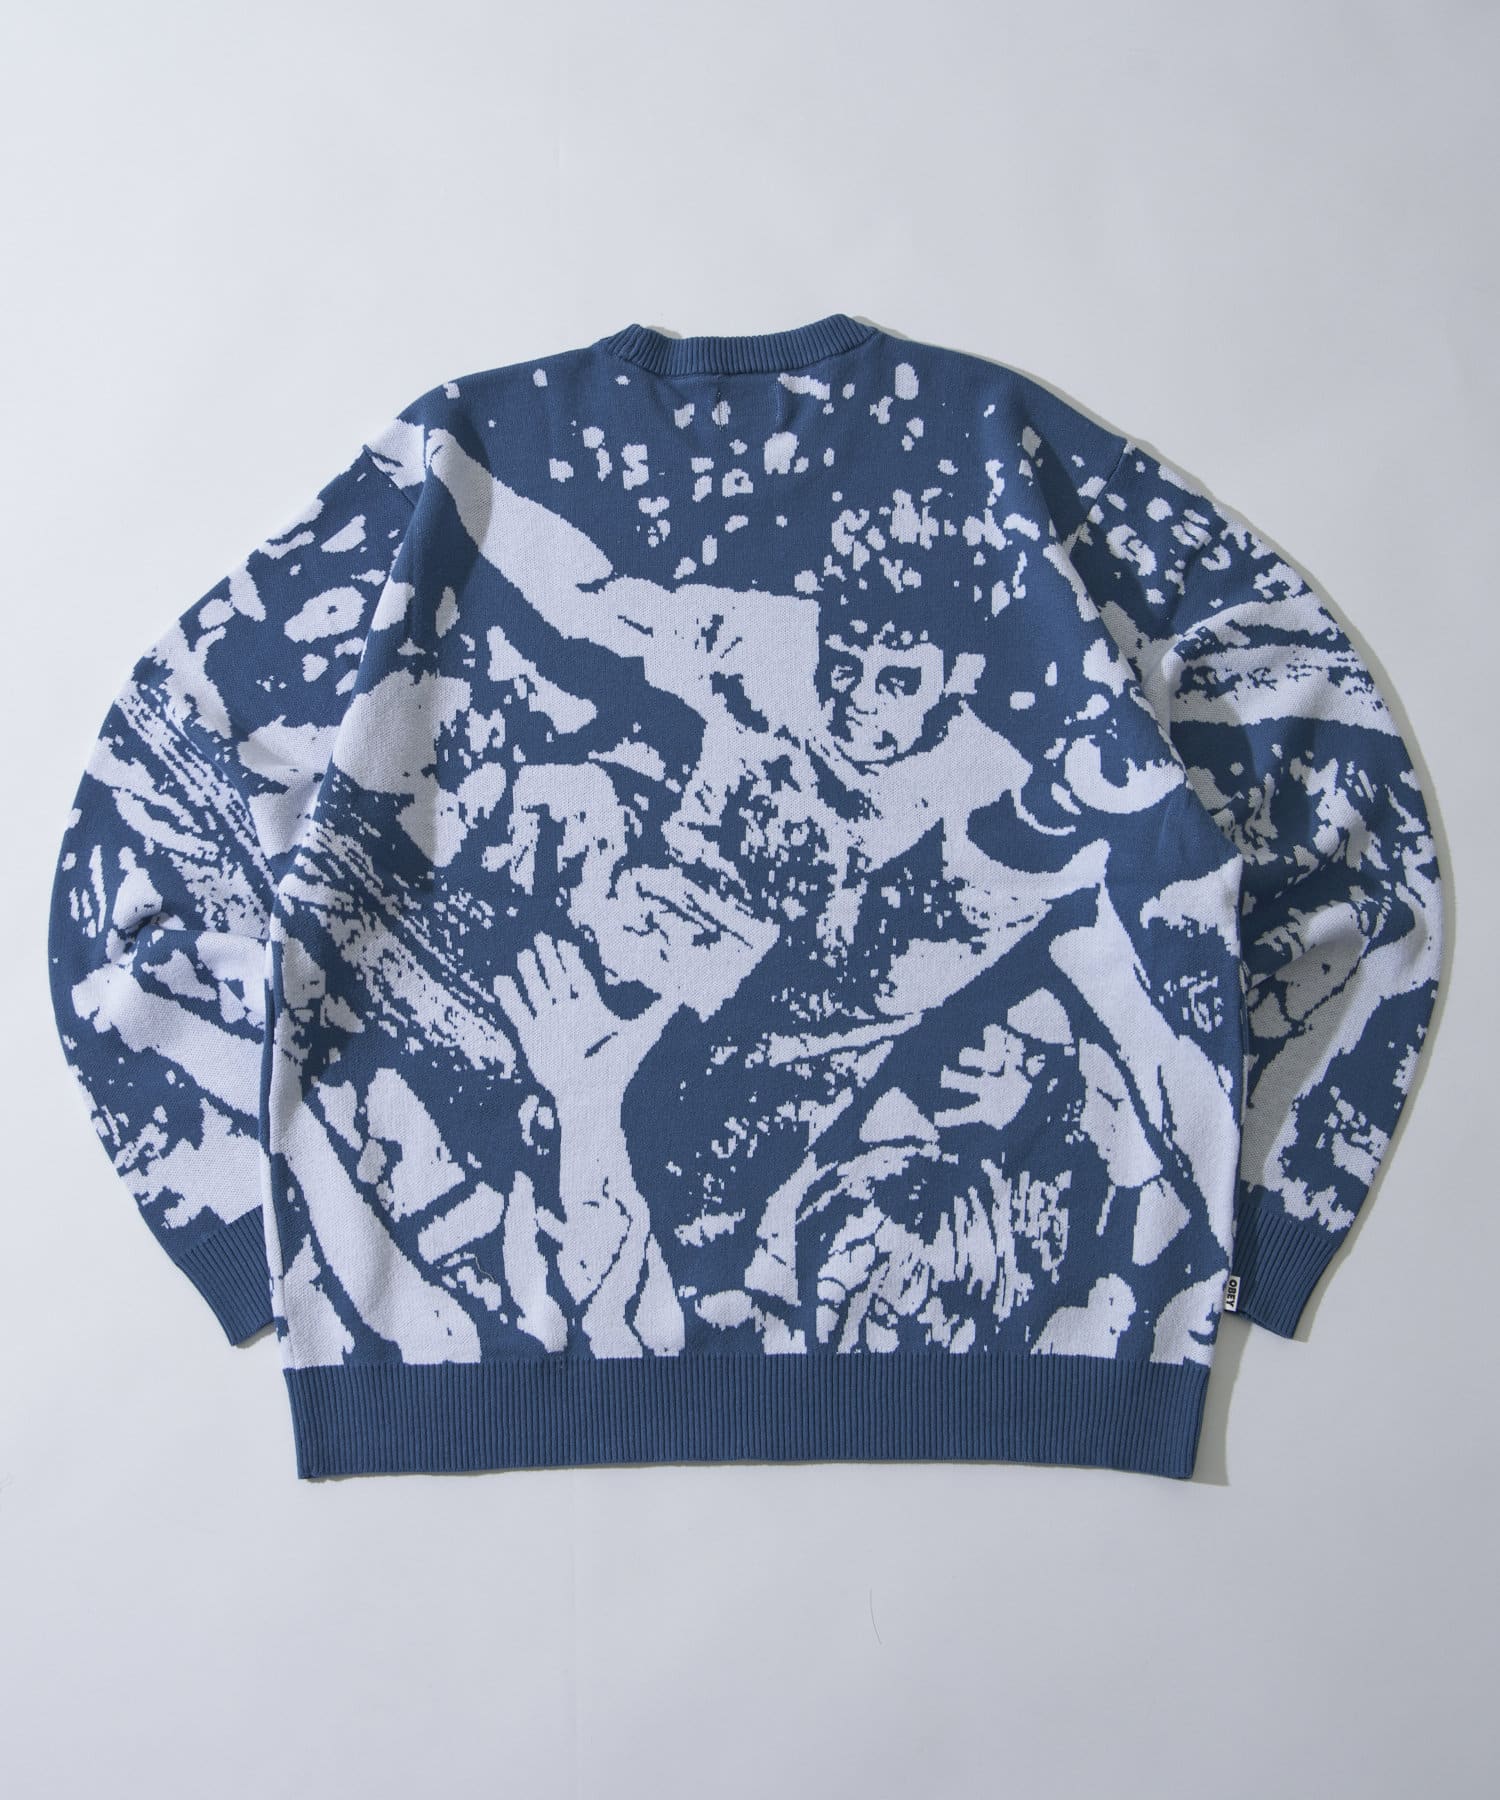 WHO’S WHO gallery(フーズフーギャラリー) 【OBEY】CROWD SURFING SWEATER